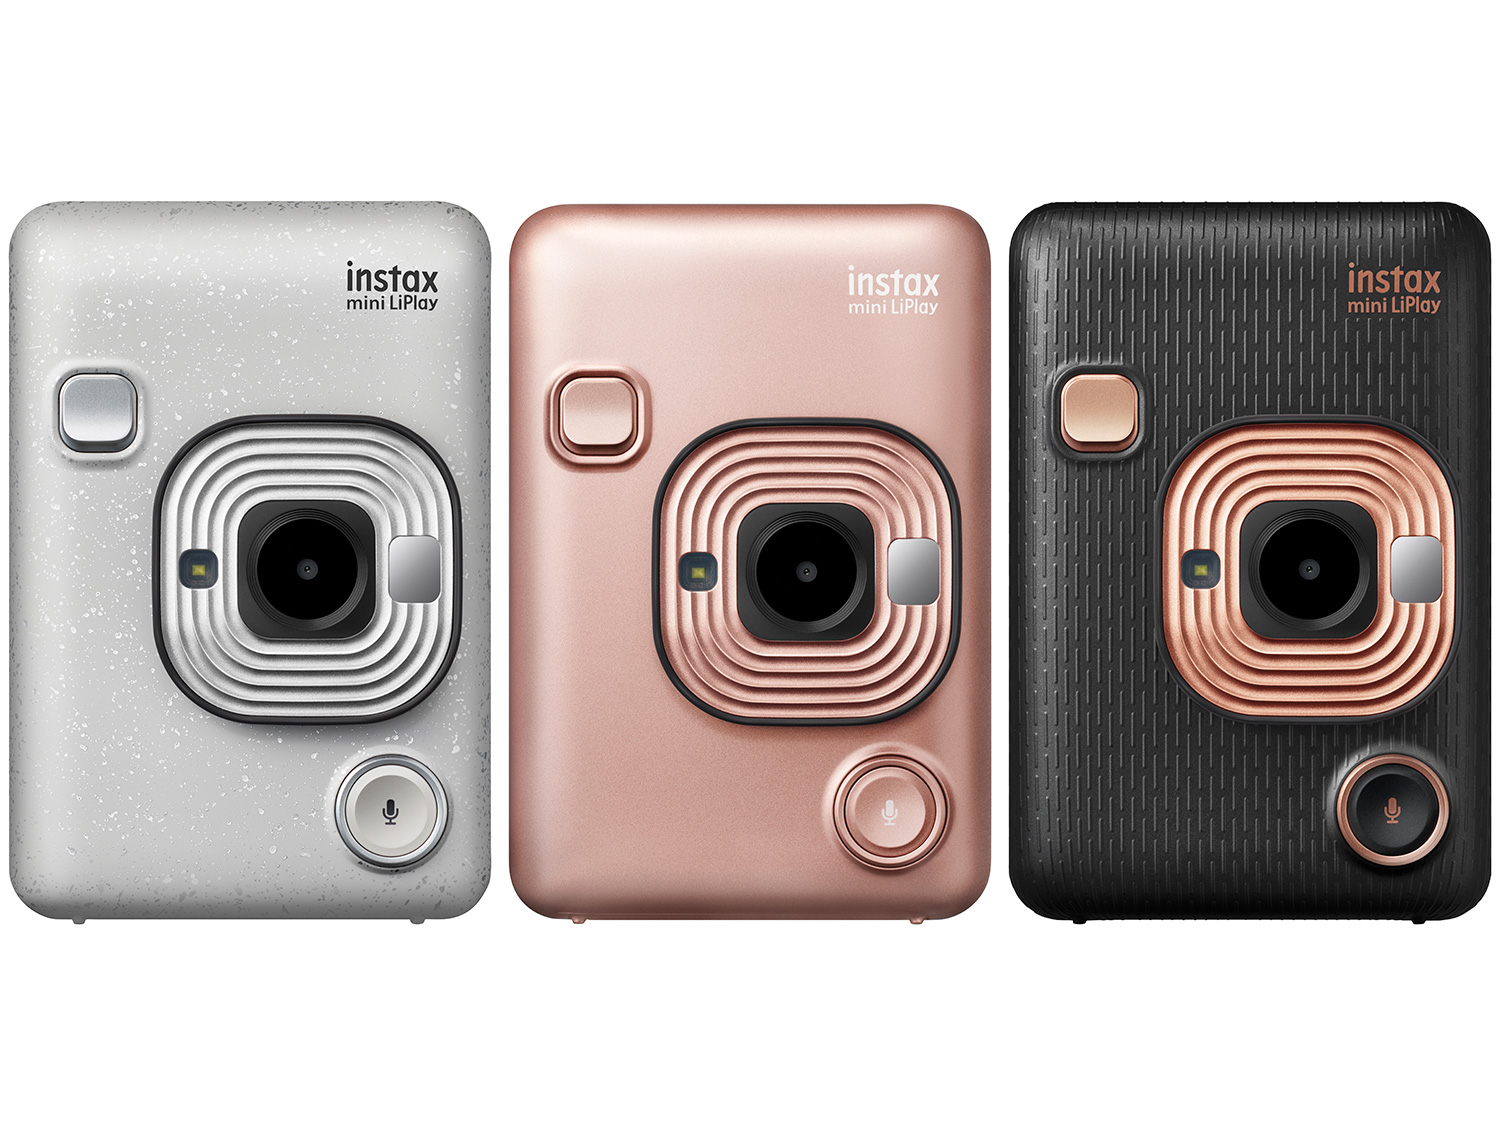 The Instax Mini LiPlay is an instant film camera that records sound